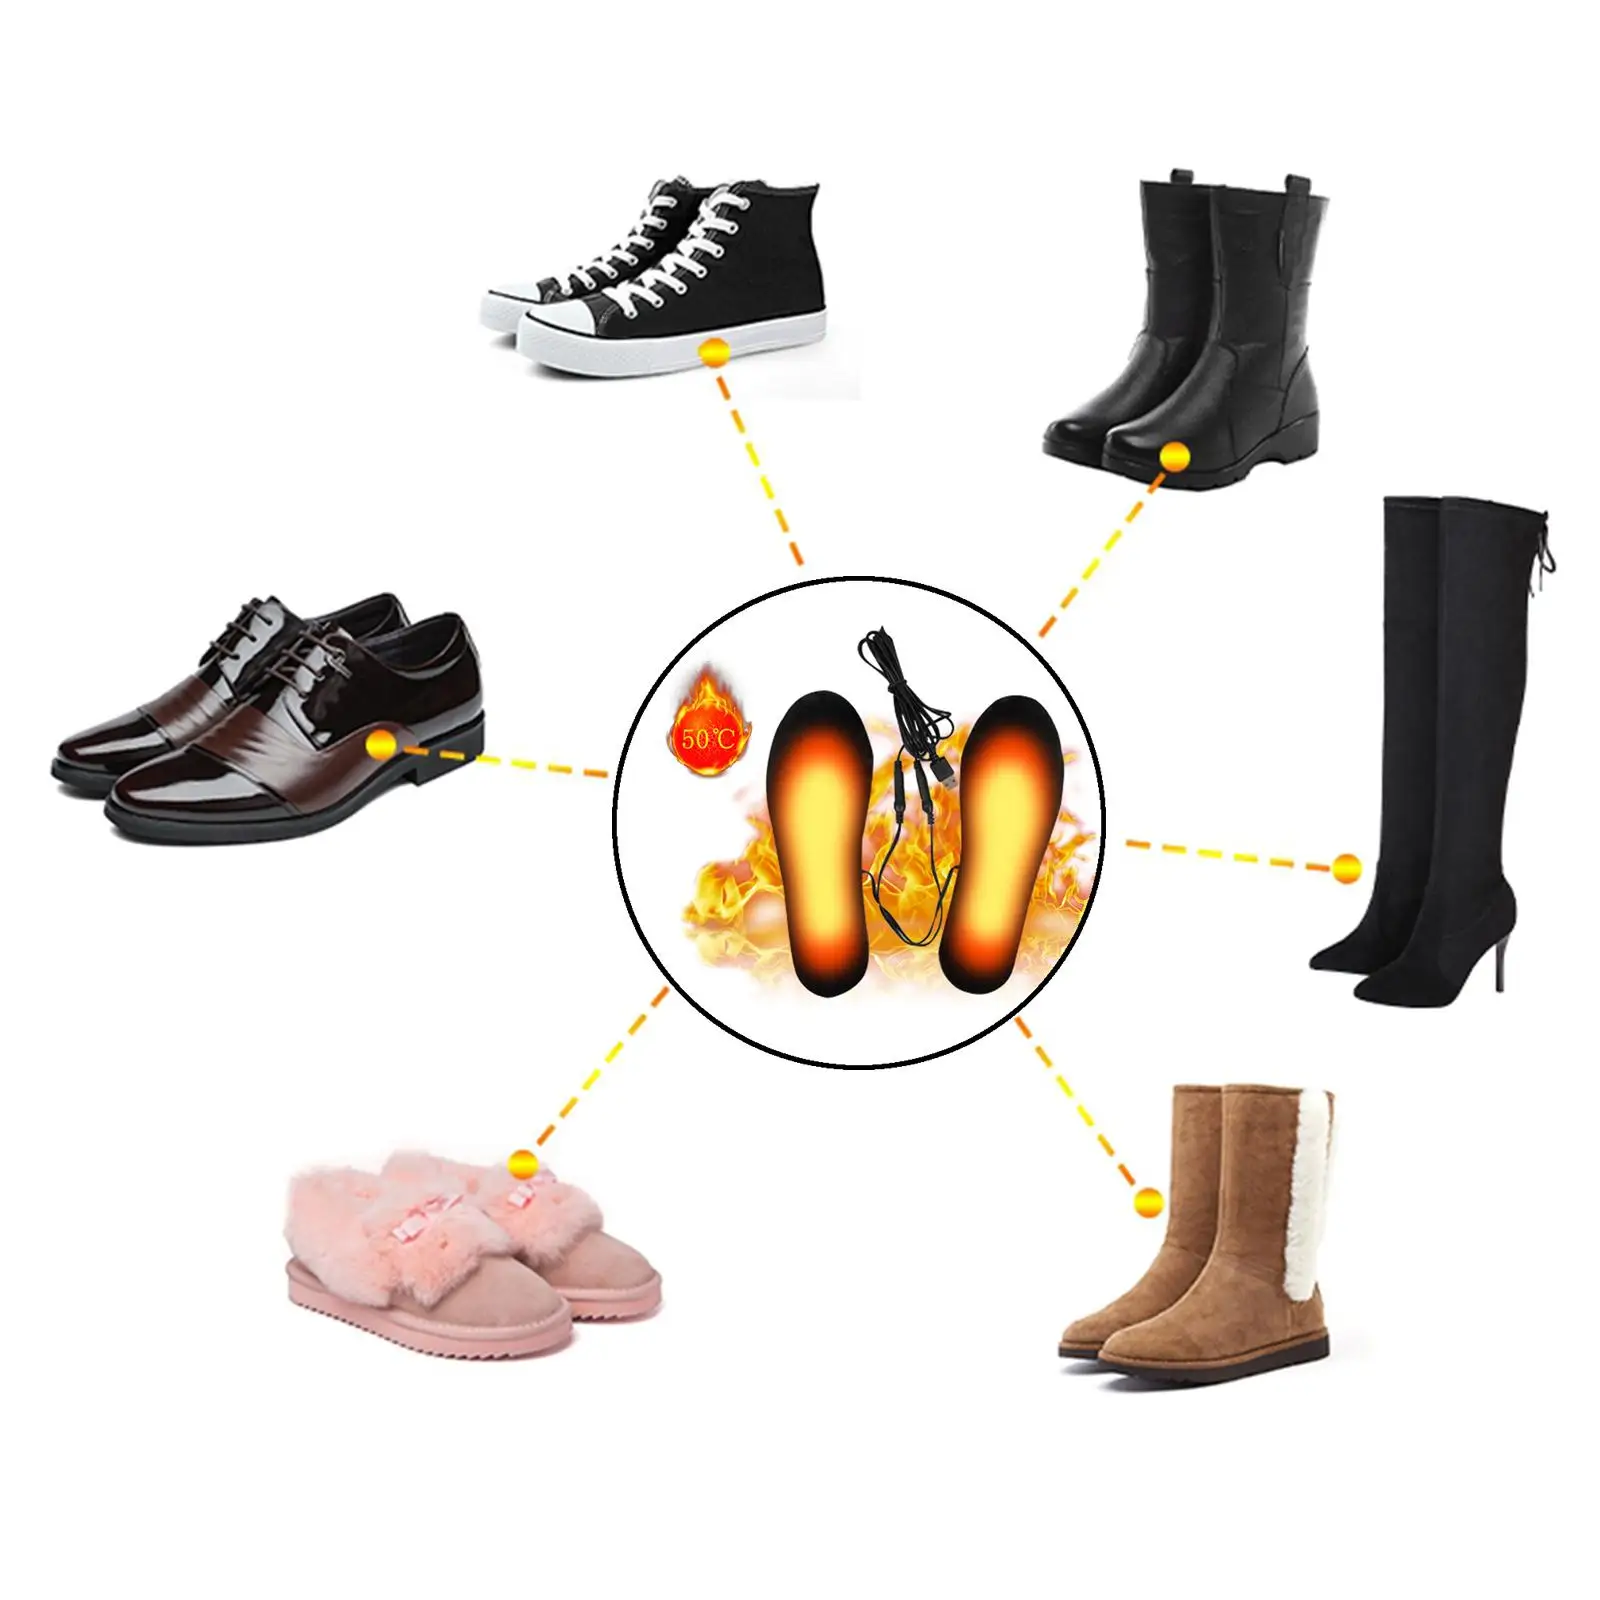 Unisex USB Electric ed Battery Foot Warmers Warm Socks Thermal Pad Boots for Fishing Skiing Hunting